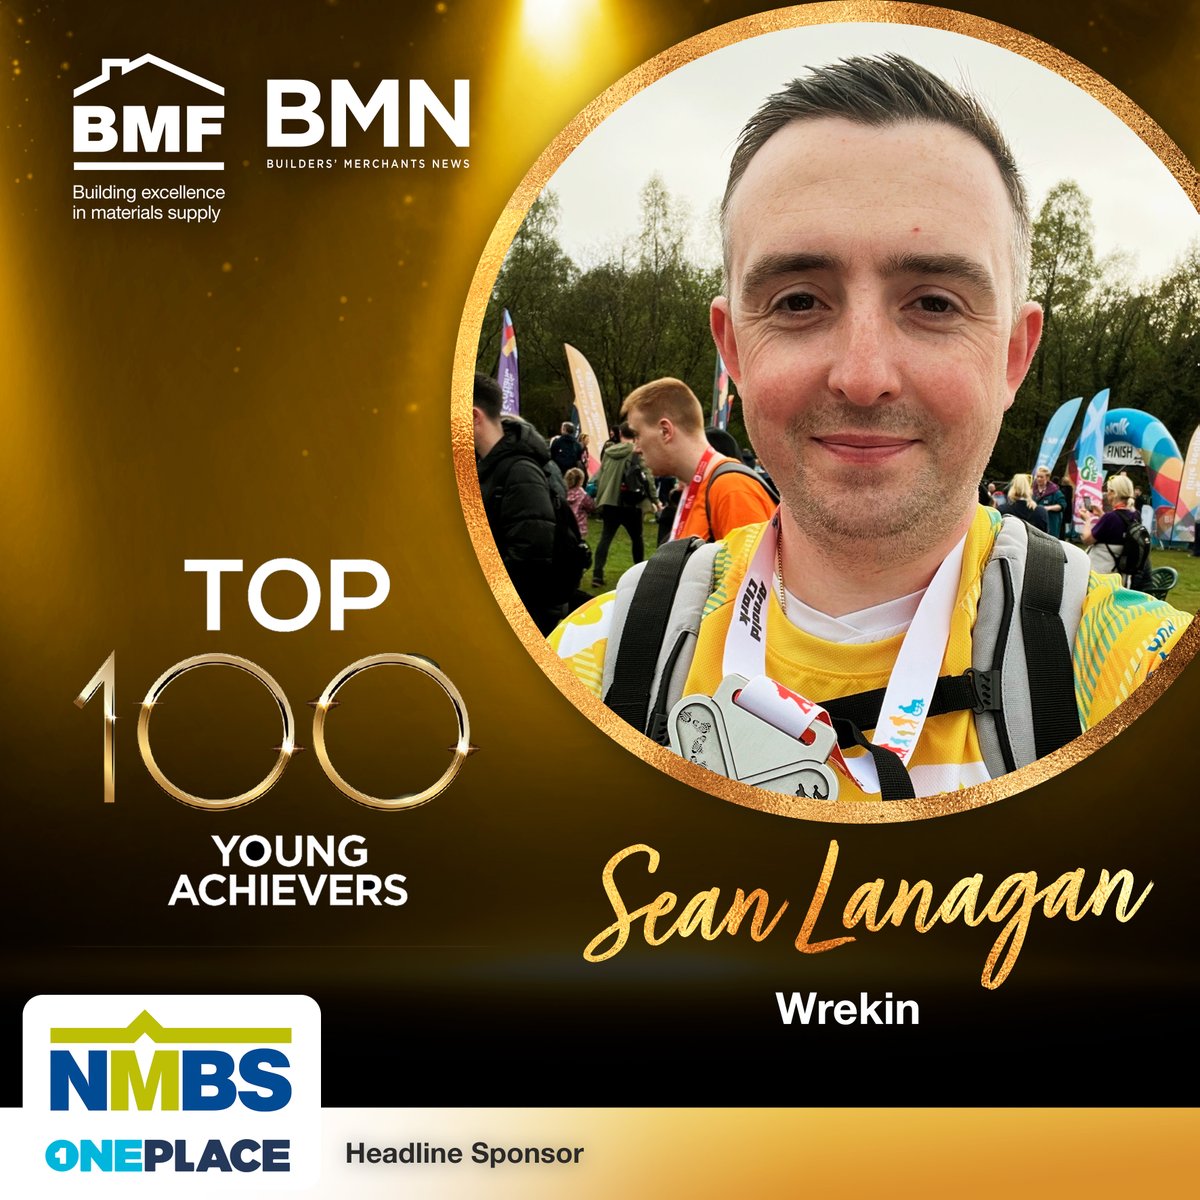 Our next BMF and @BMerchantsNews Top 100 Young Achievers Sean Lanagan, National Sales Manager at Wrekin. Our Top 100 Supplier Influencer nominees are kindly sponsored by our head sponsor, @NationalMerch. #Top100YoungAchiever